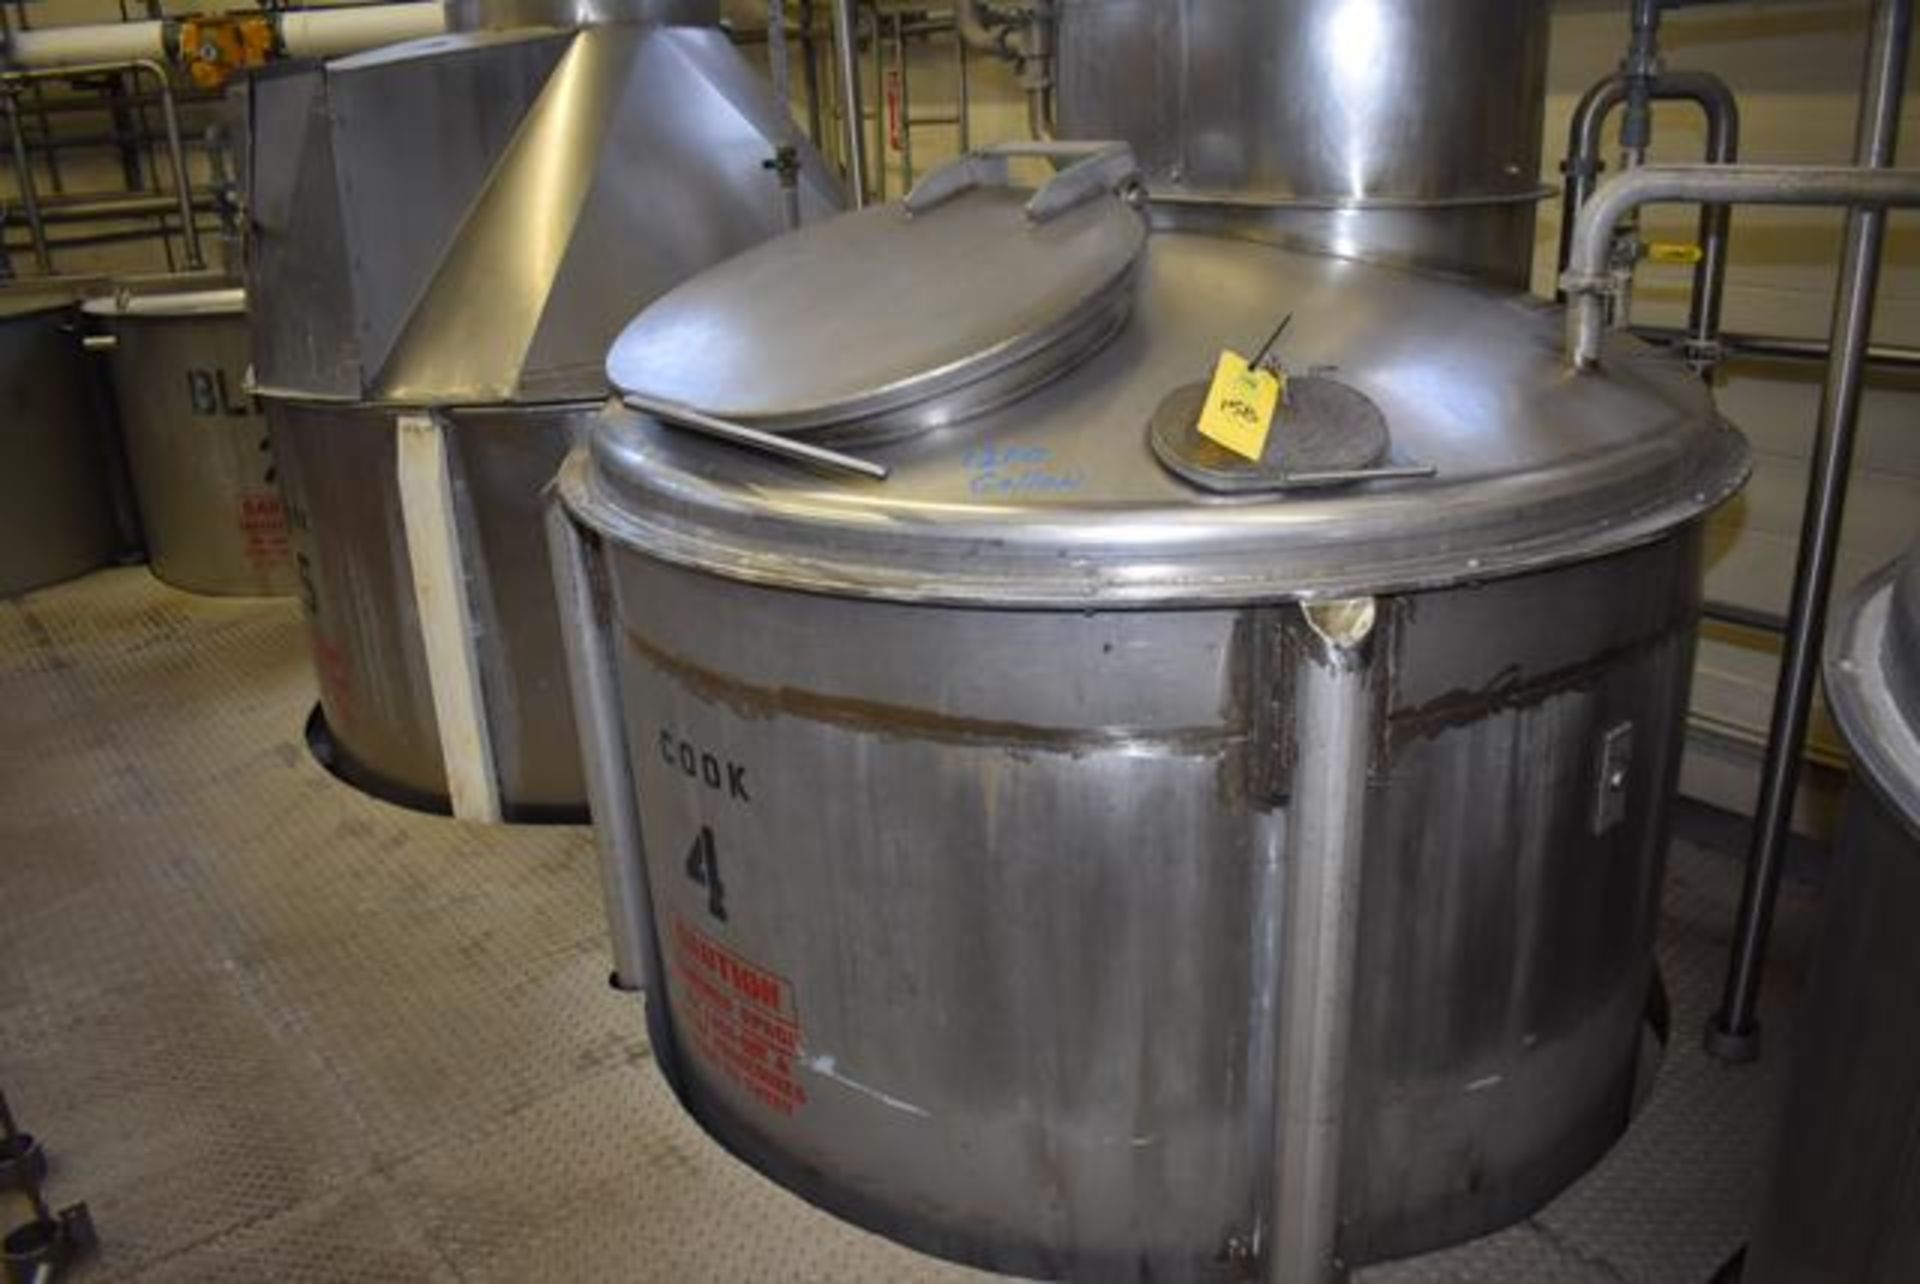 Langsenkamp 1200 Gallon Capacity, 6' Diameter x 8' Deep Stainless Steel Cook Tank, Equipped with